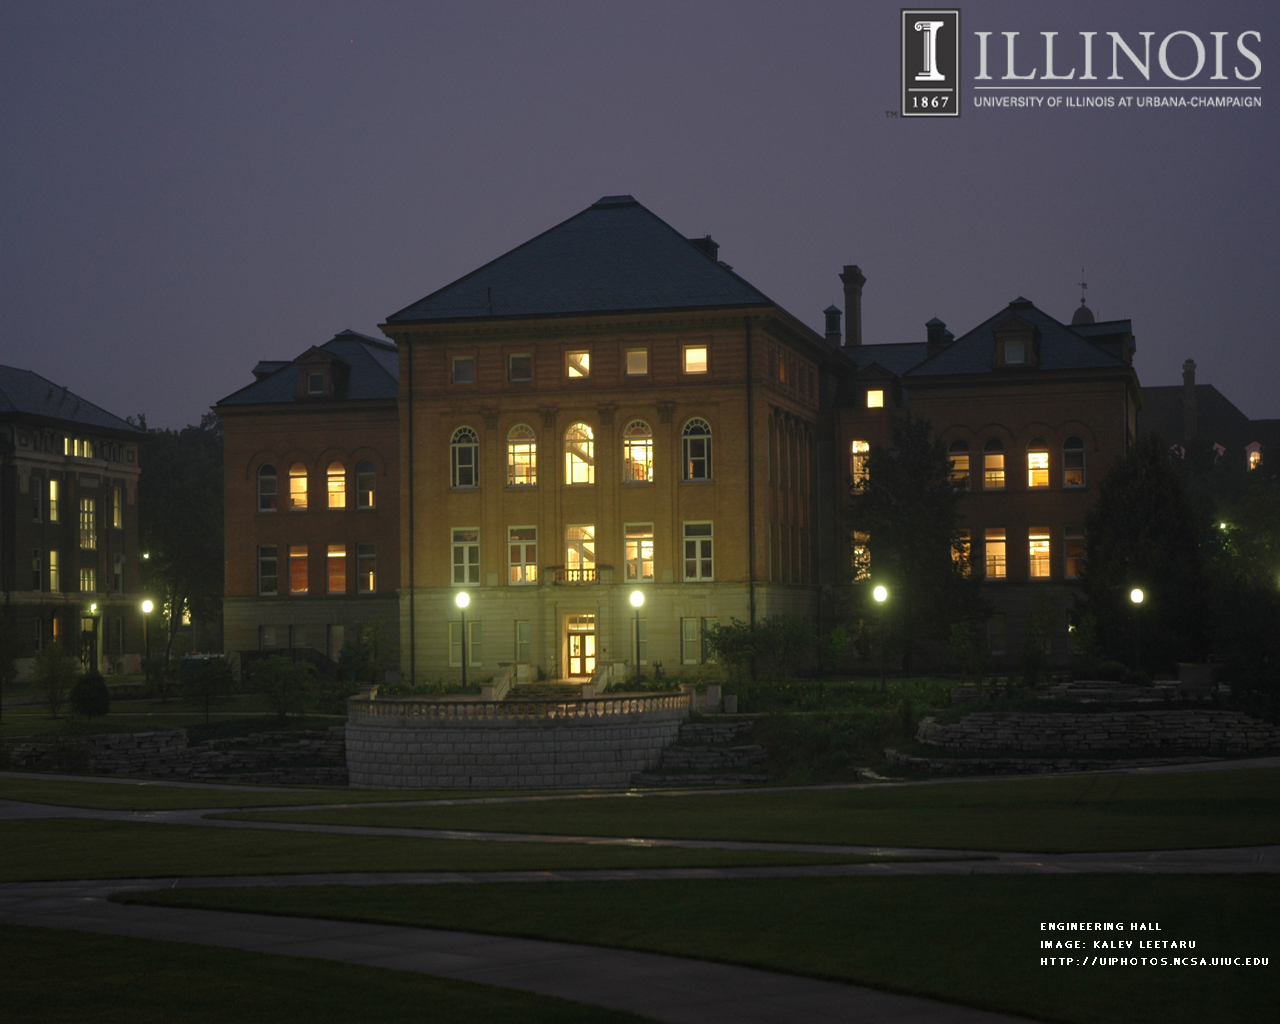 University Wallpaper You Should See Public Affairs And